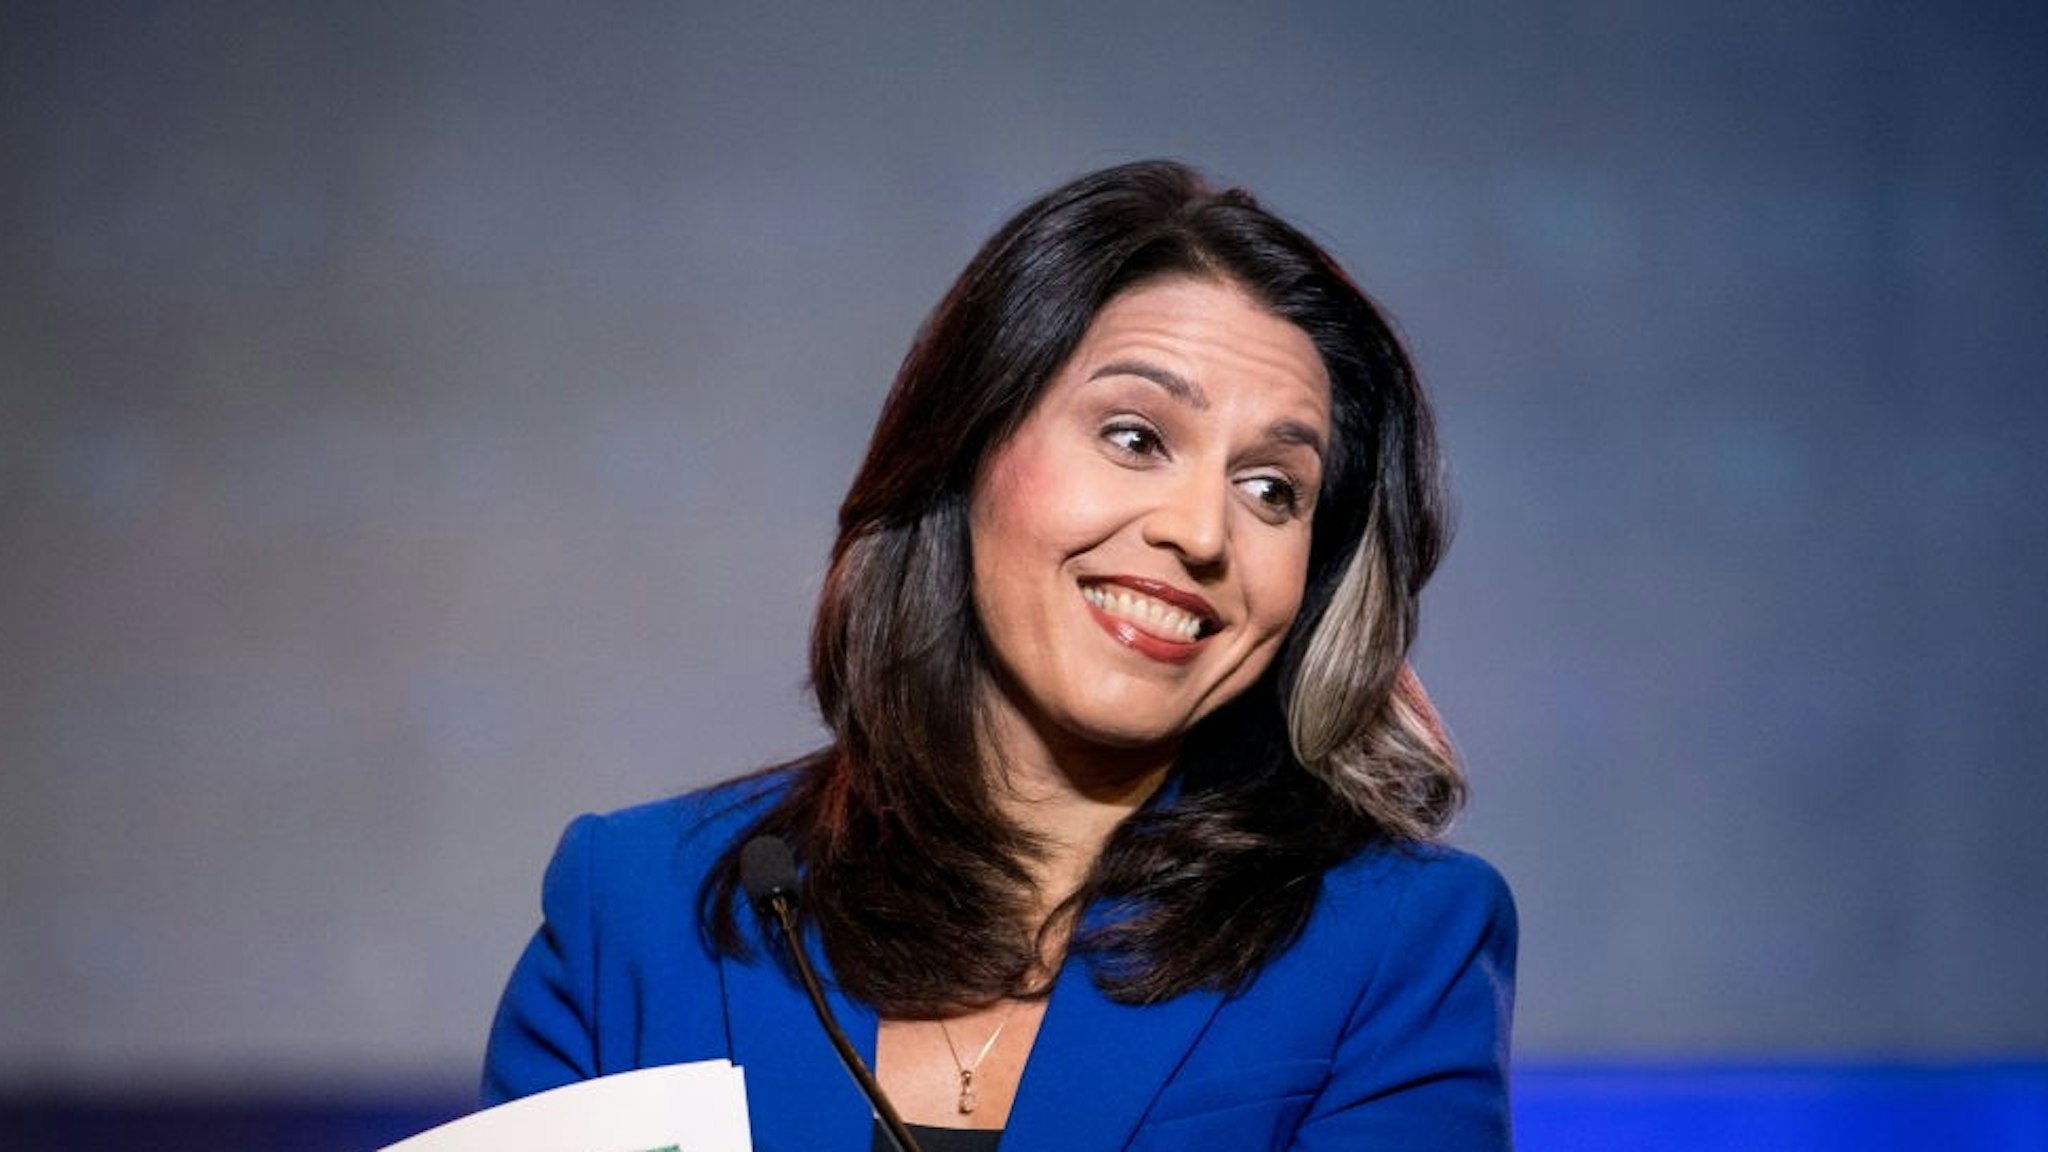 COLUMBIA, SC - JUNE 22: Democratic presidential candidate Rep. Tulsi Gabbard (R-HI) addresses the crowd during the 2019 South Carolina Democratic Party State Convention on June 22, 2019 in Columbia, South Carolina. Democratic presidential hopefuls are converging on South Carolina this weekend for a host of events where the candidates can directly address an important voting bloc in the Democratic primary.